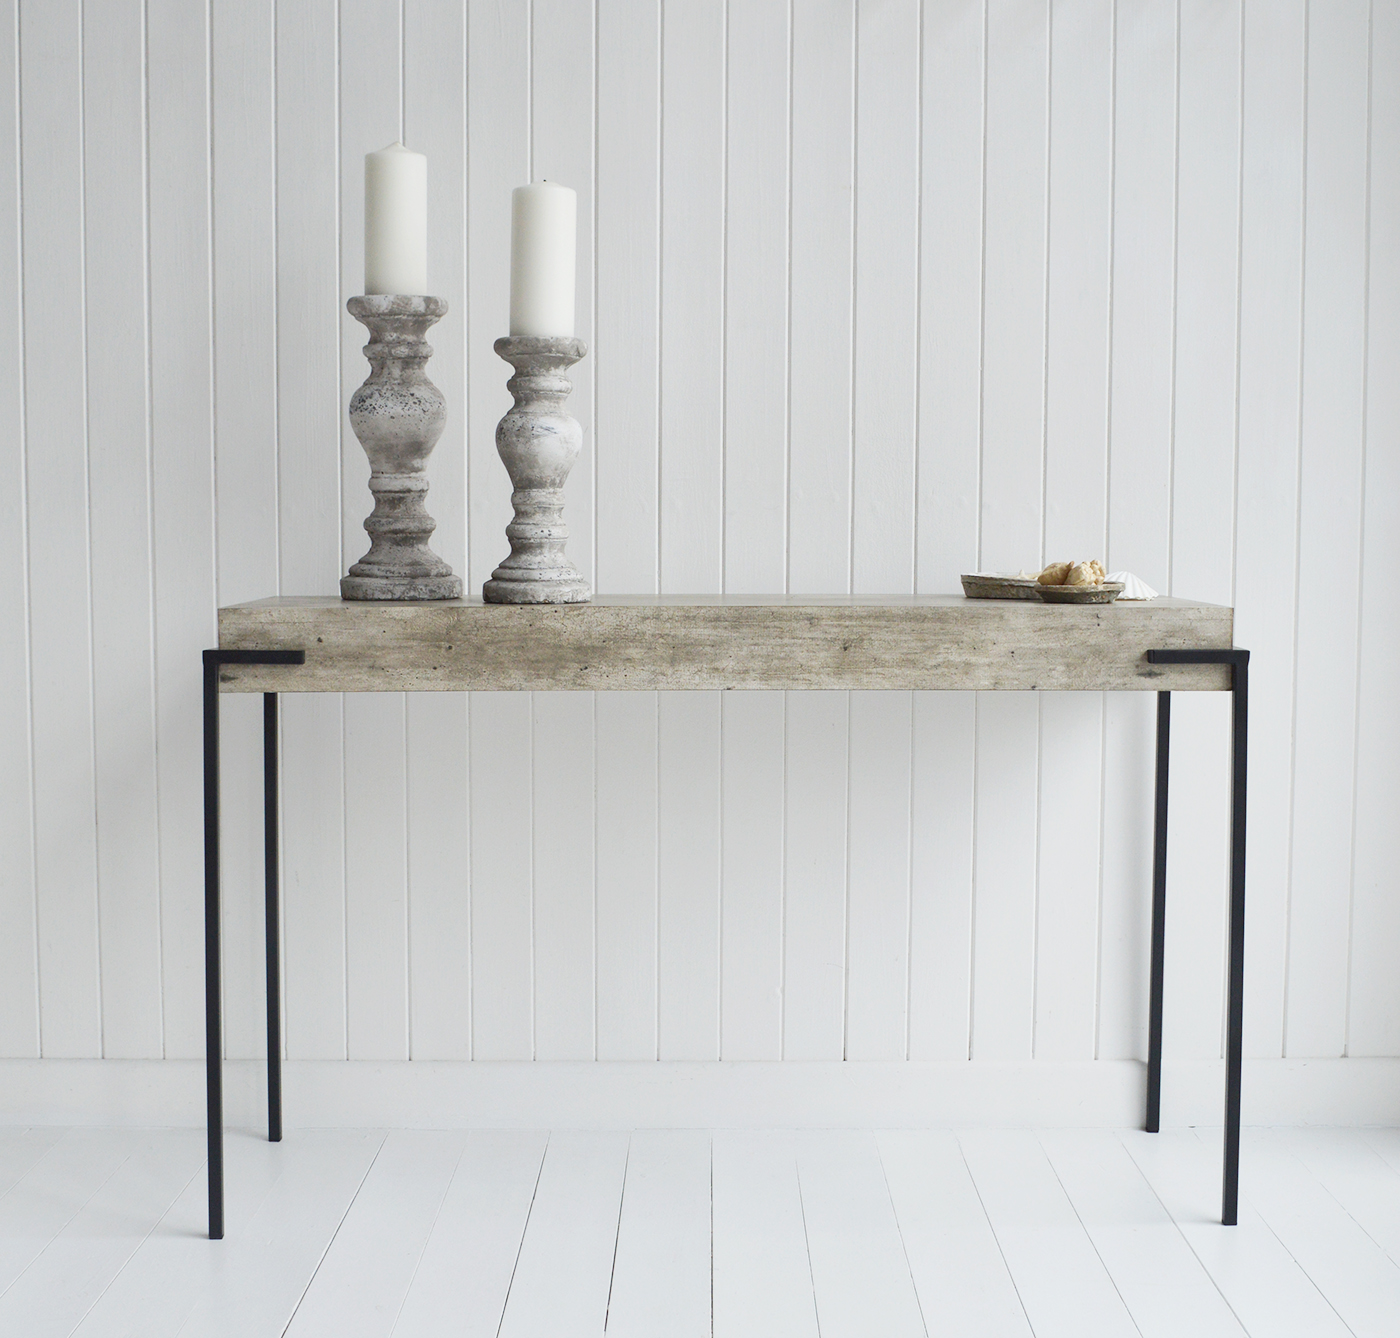 Hamilton hallway console table. New England furniture, coastal, country, city for hallway furniture and living room design from The White Lighthouse Hallway